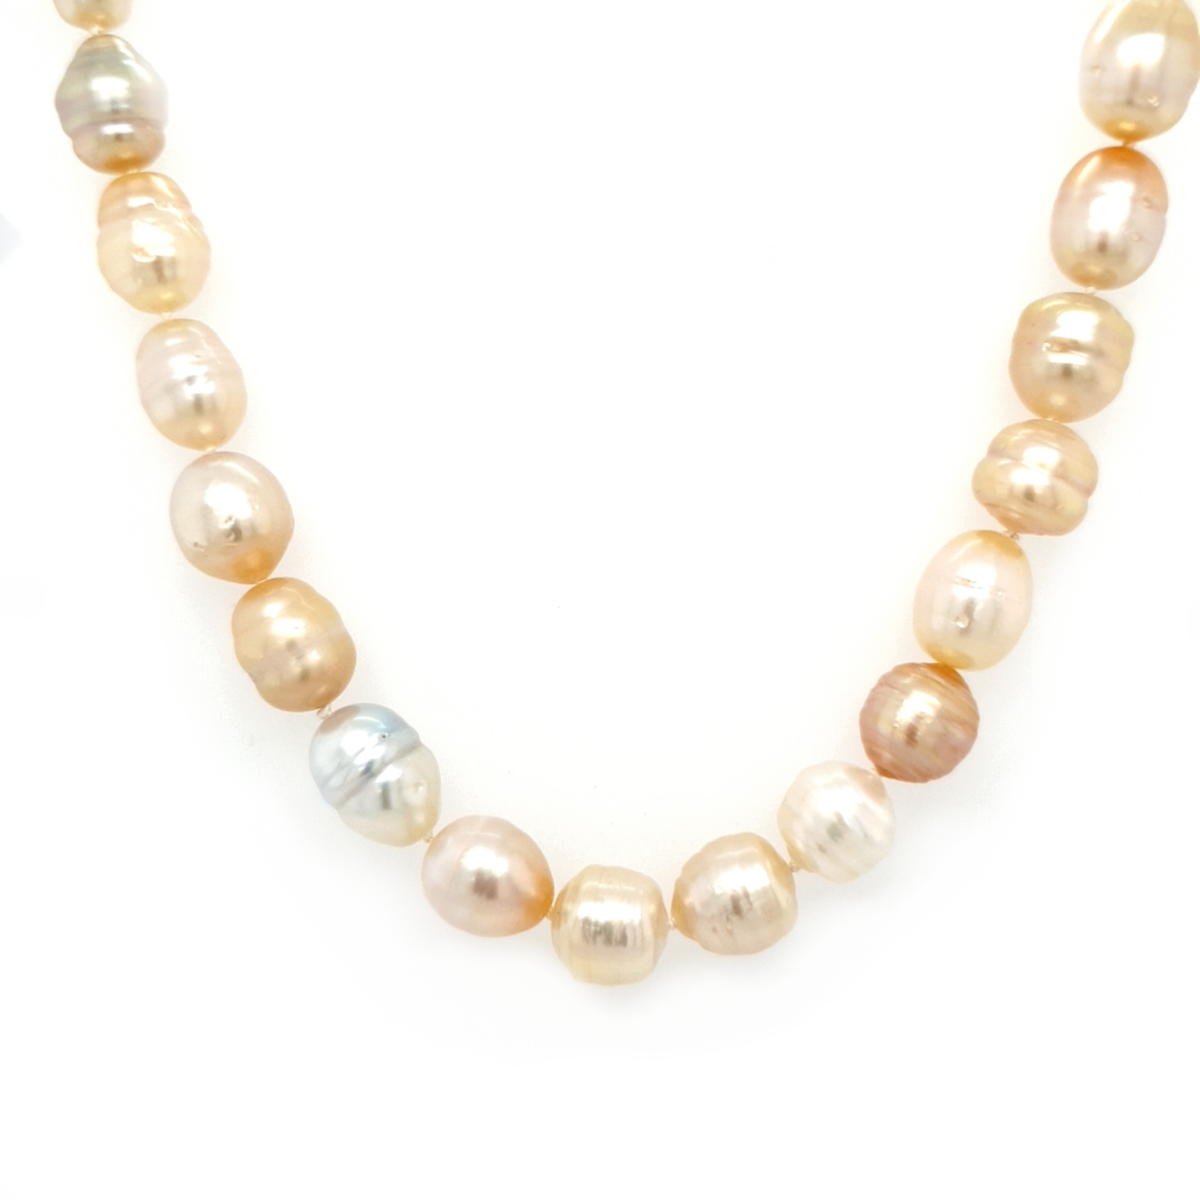 Leon Bakers 9K Yellow Gold South Sea Pearls on Strand_0